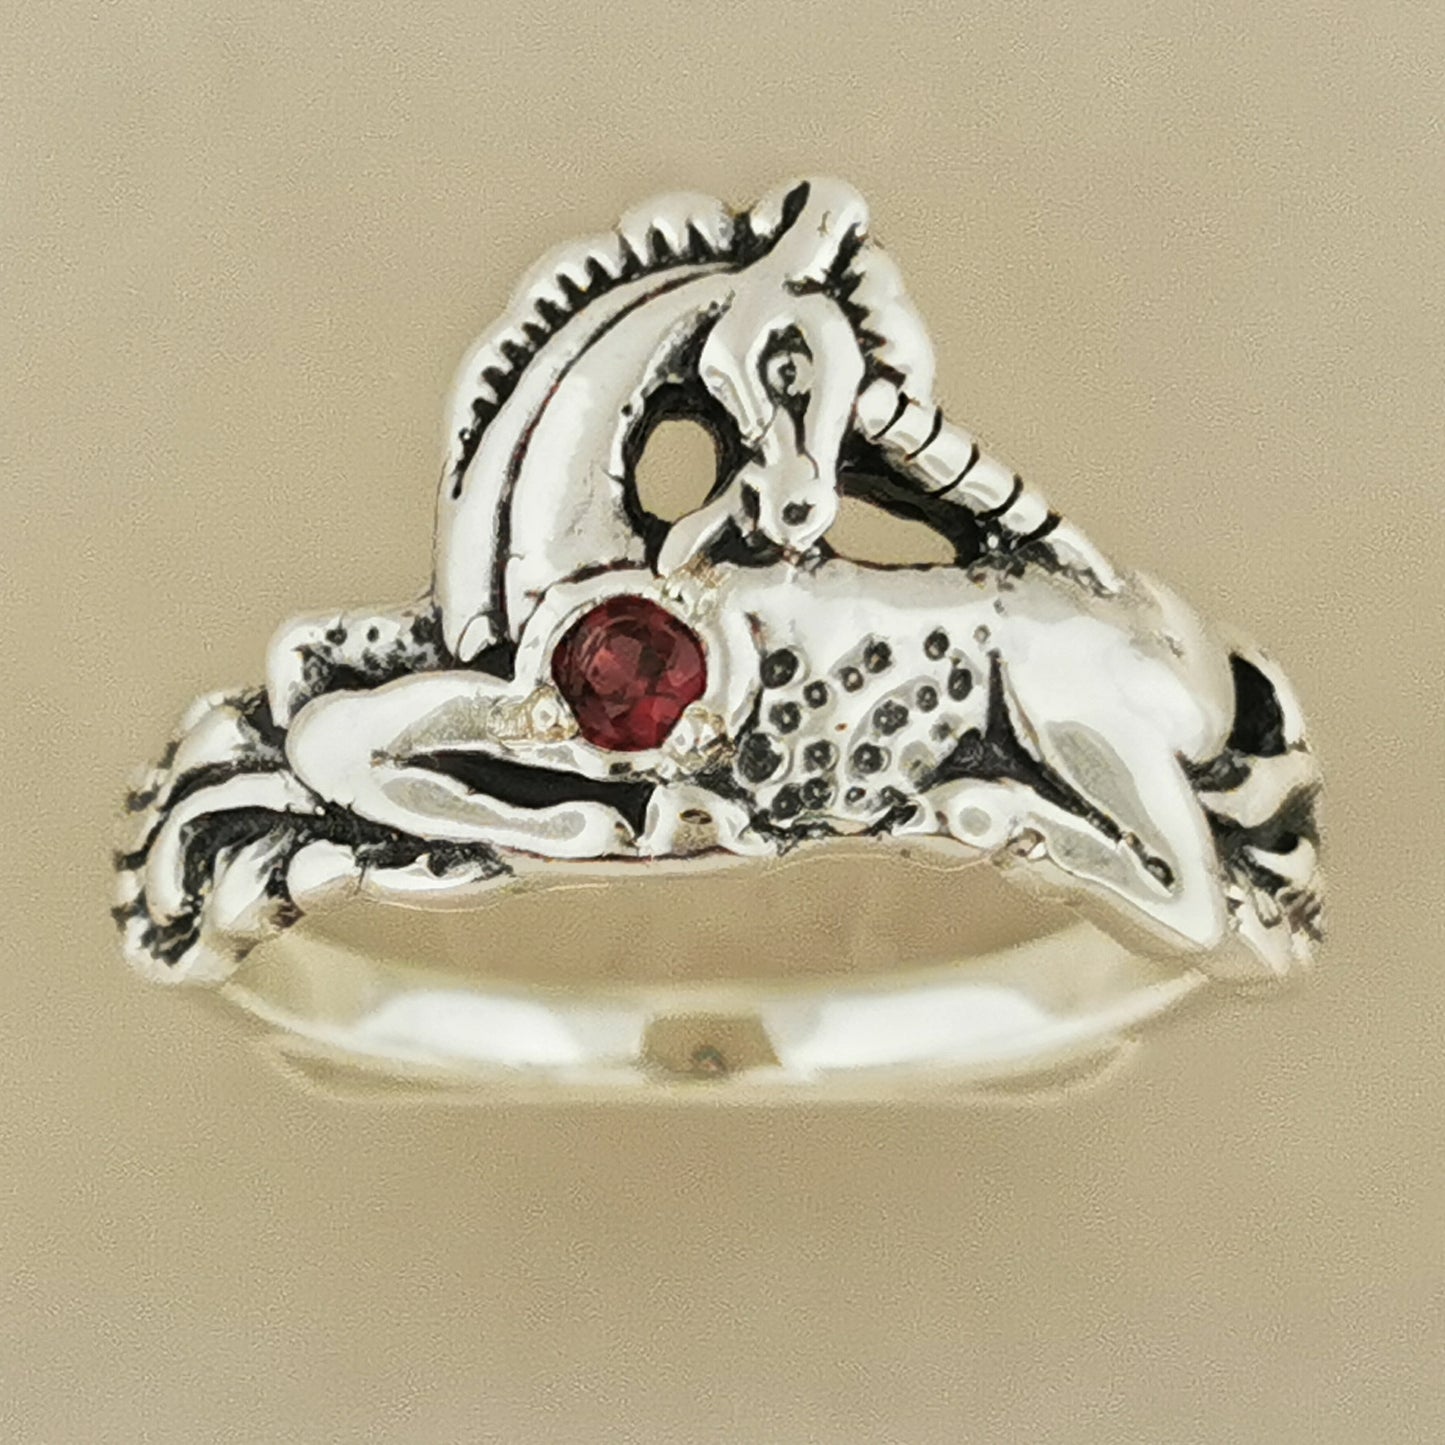 Gemstone Unicorn Ring in Sterling Silver, Silver Unicorn Ring Jewelry, Unicorn Gift for Her, Birthstone Unicorn Ring, Unicorn Birthstone Ring, Unicorn Birthstone Jewellery, Unicorn Ring In Sterling Silver, Vintage Unicorn Ring, Unicorn Gemstone Ring